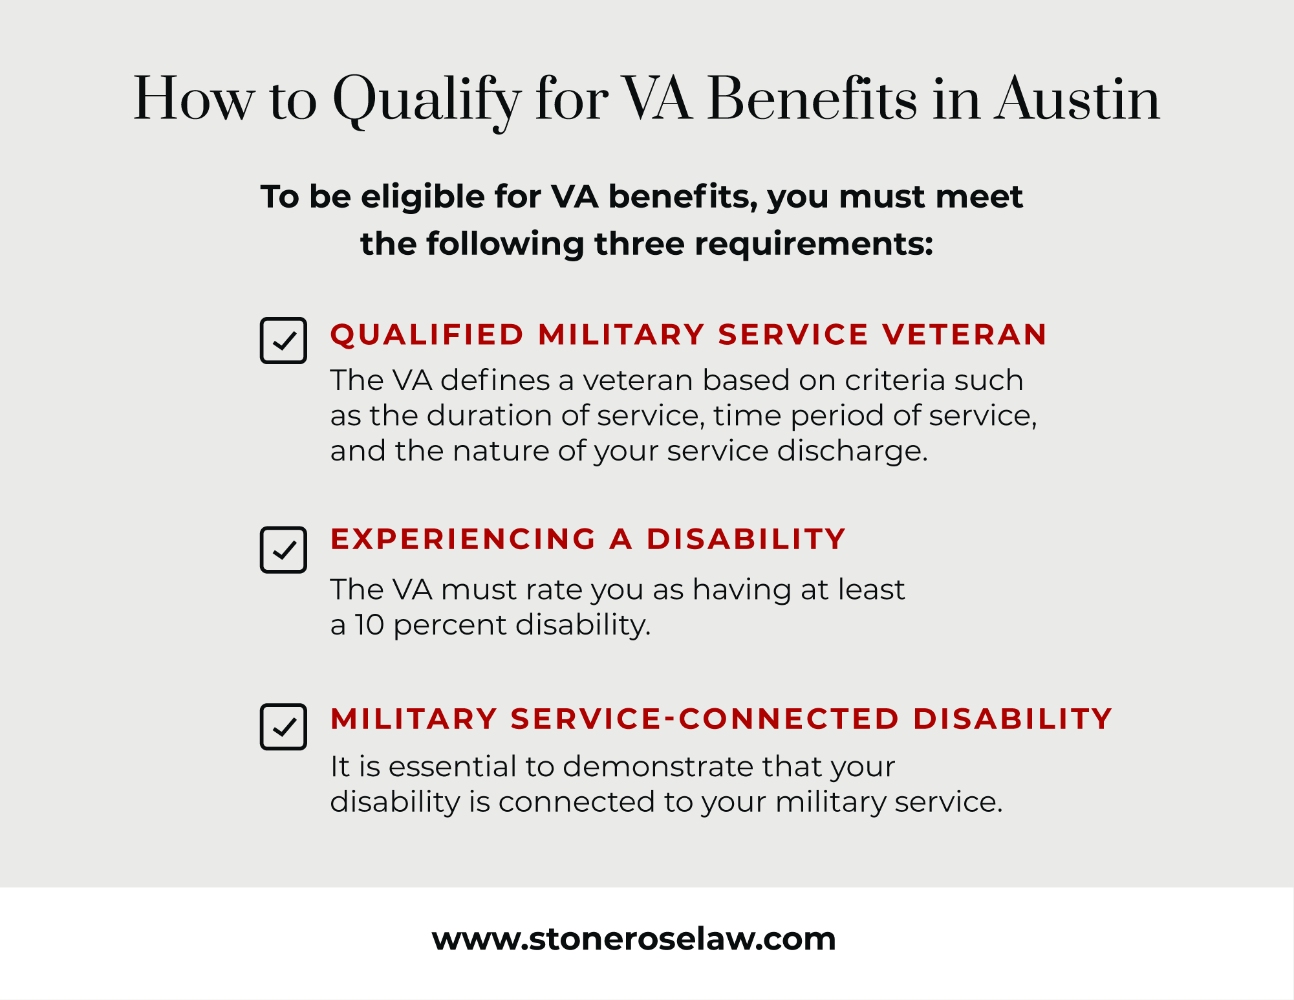 How to qualify for VA benefits in Austin